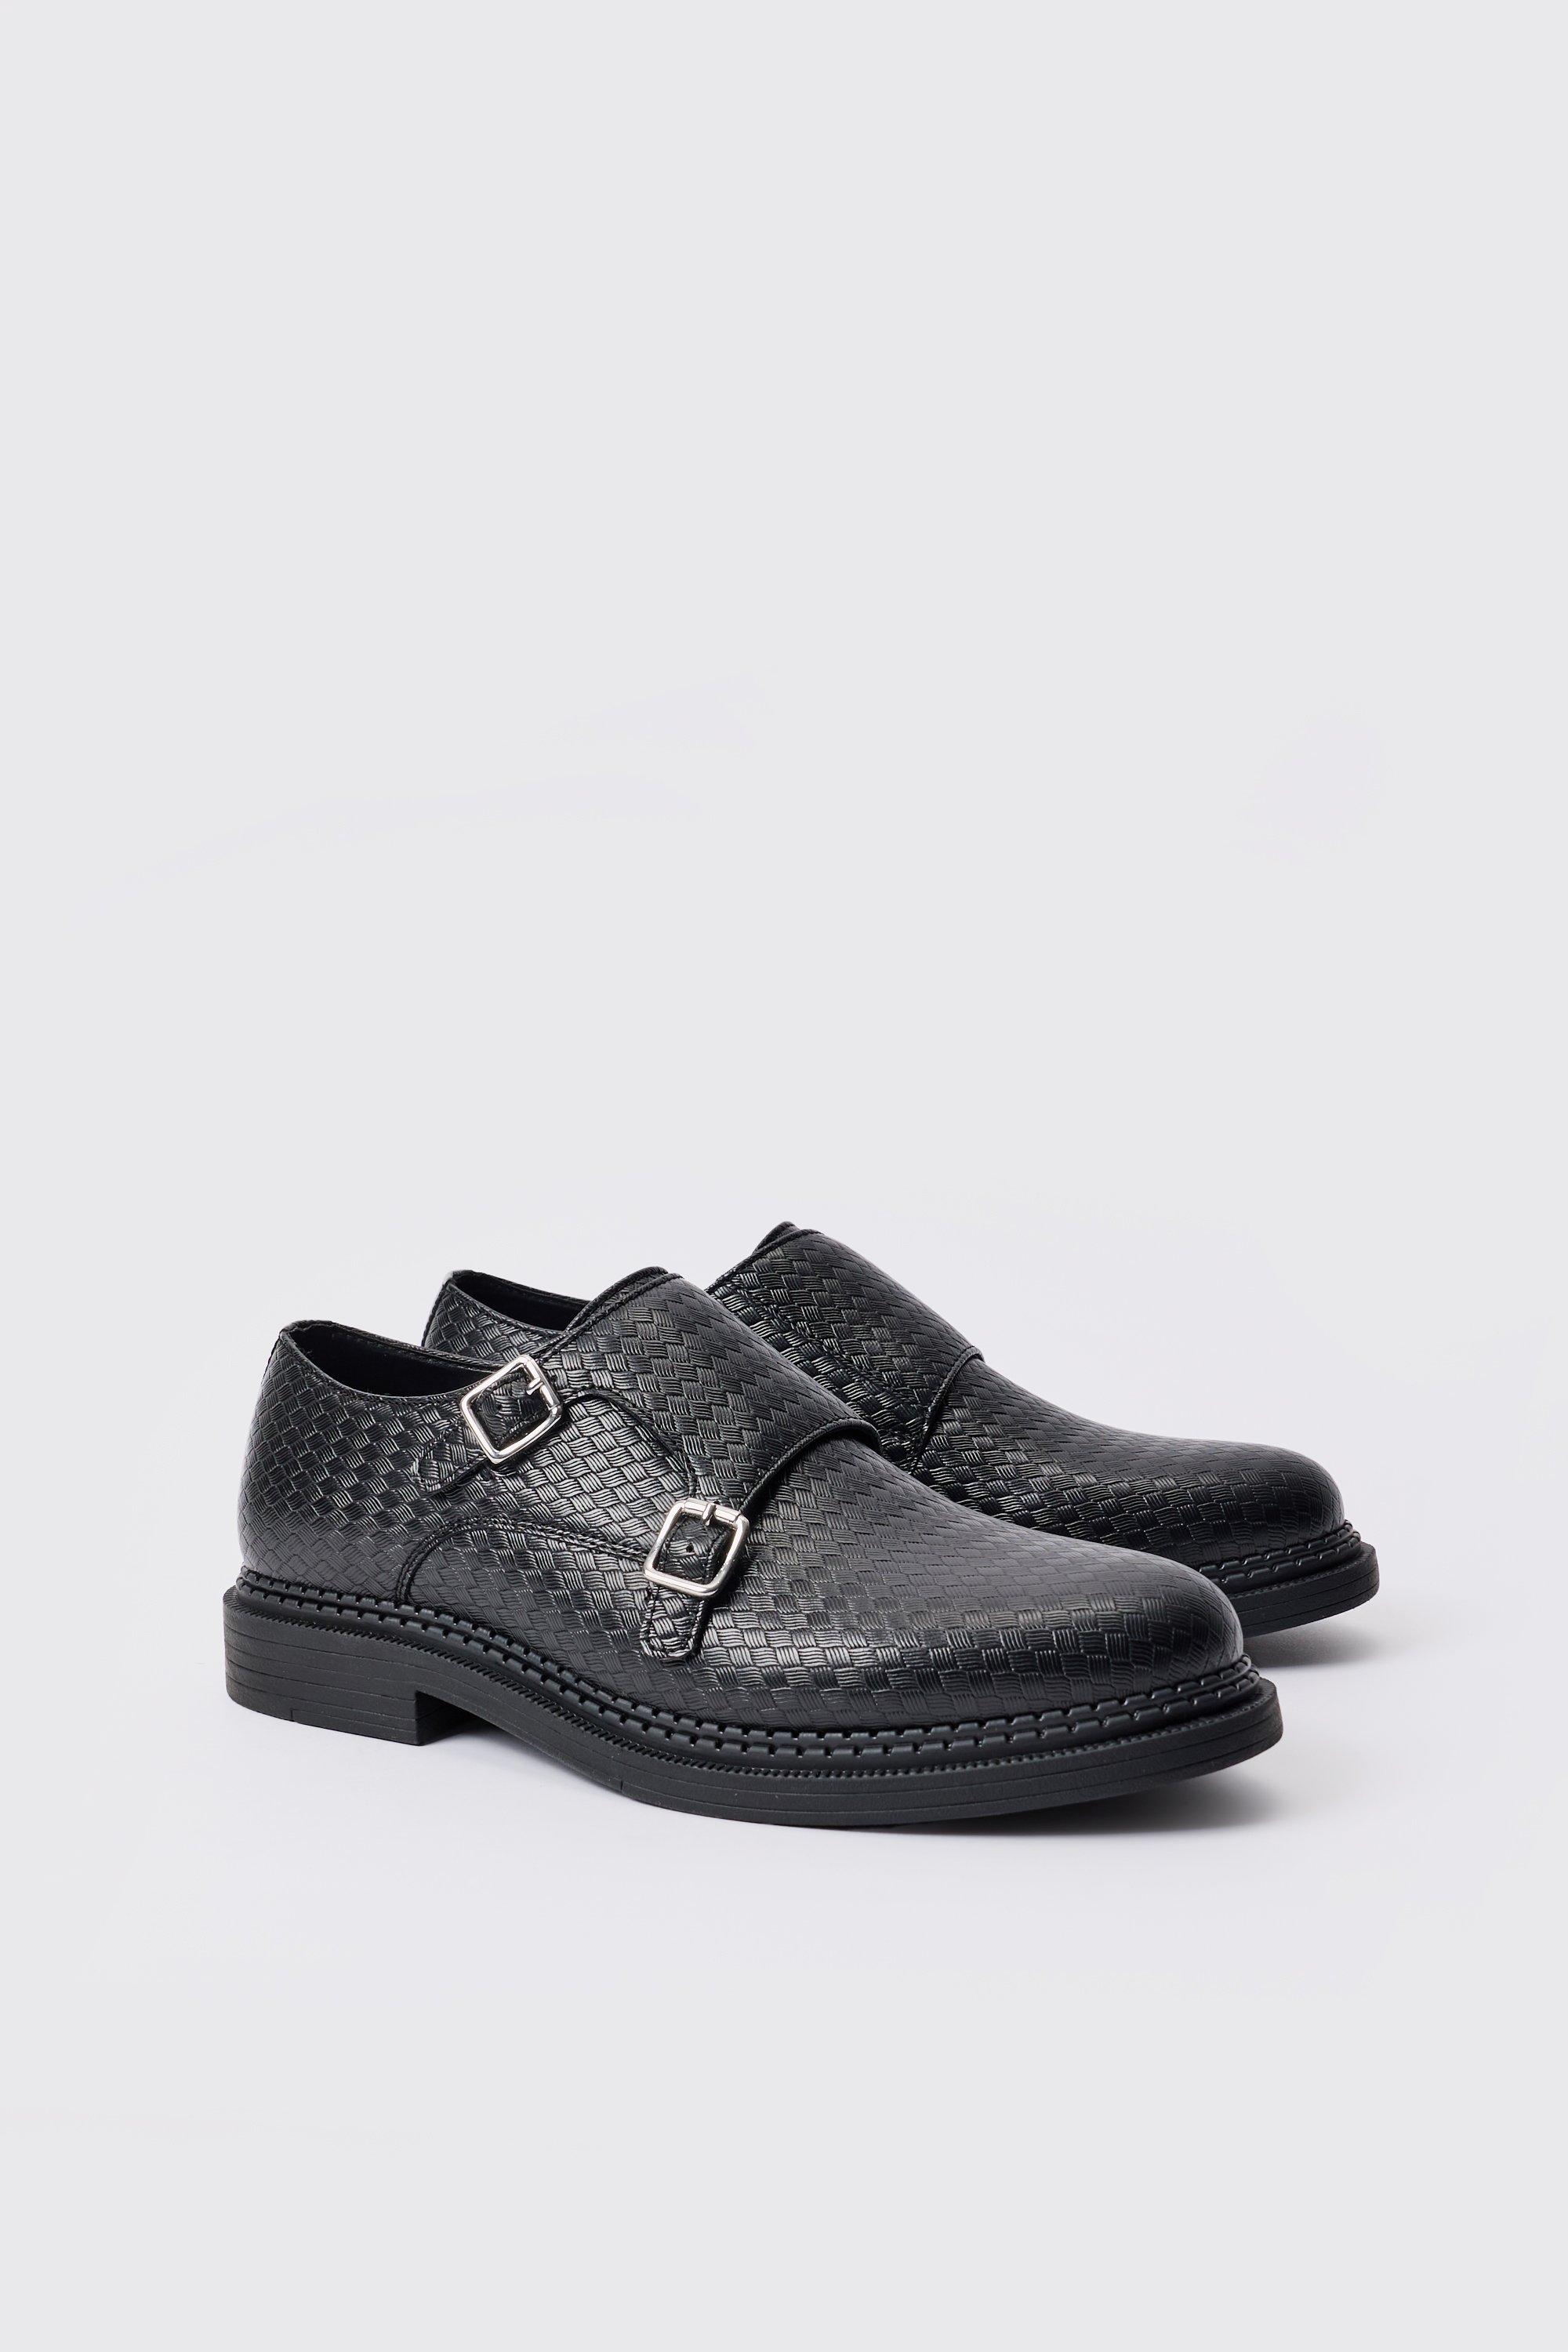 Boohoo Woven Pu Monk Strap Loafer In Black, Black